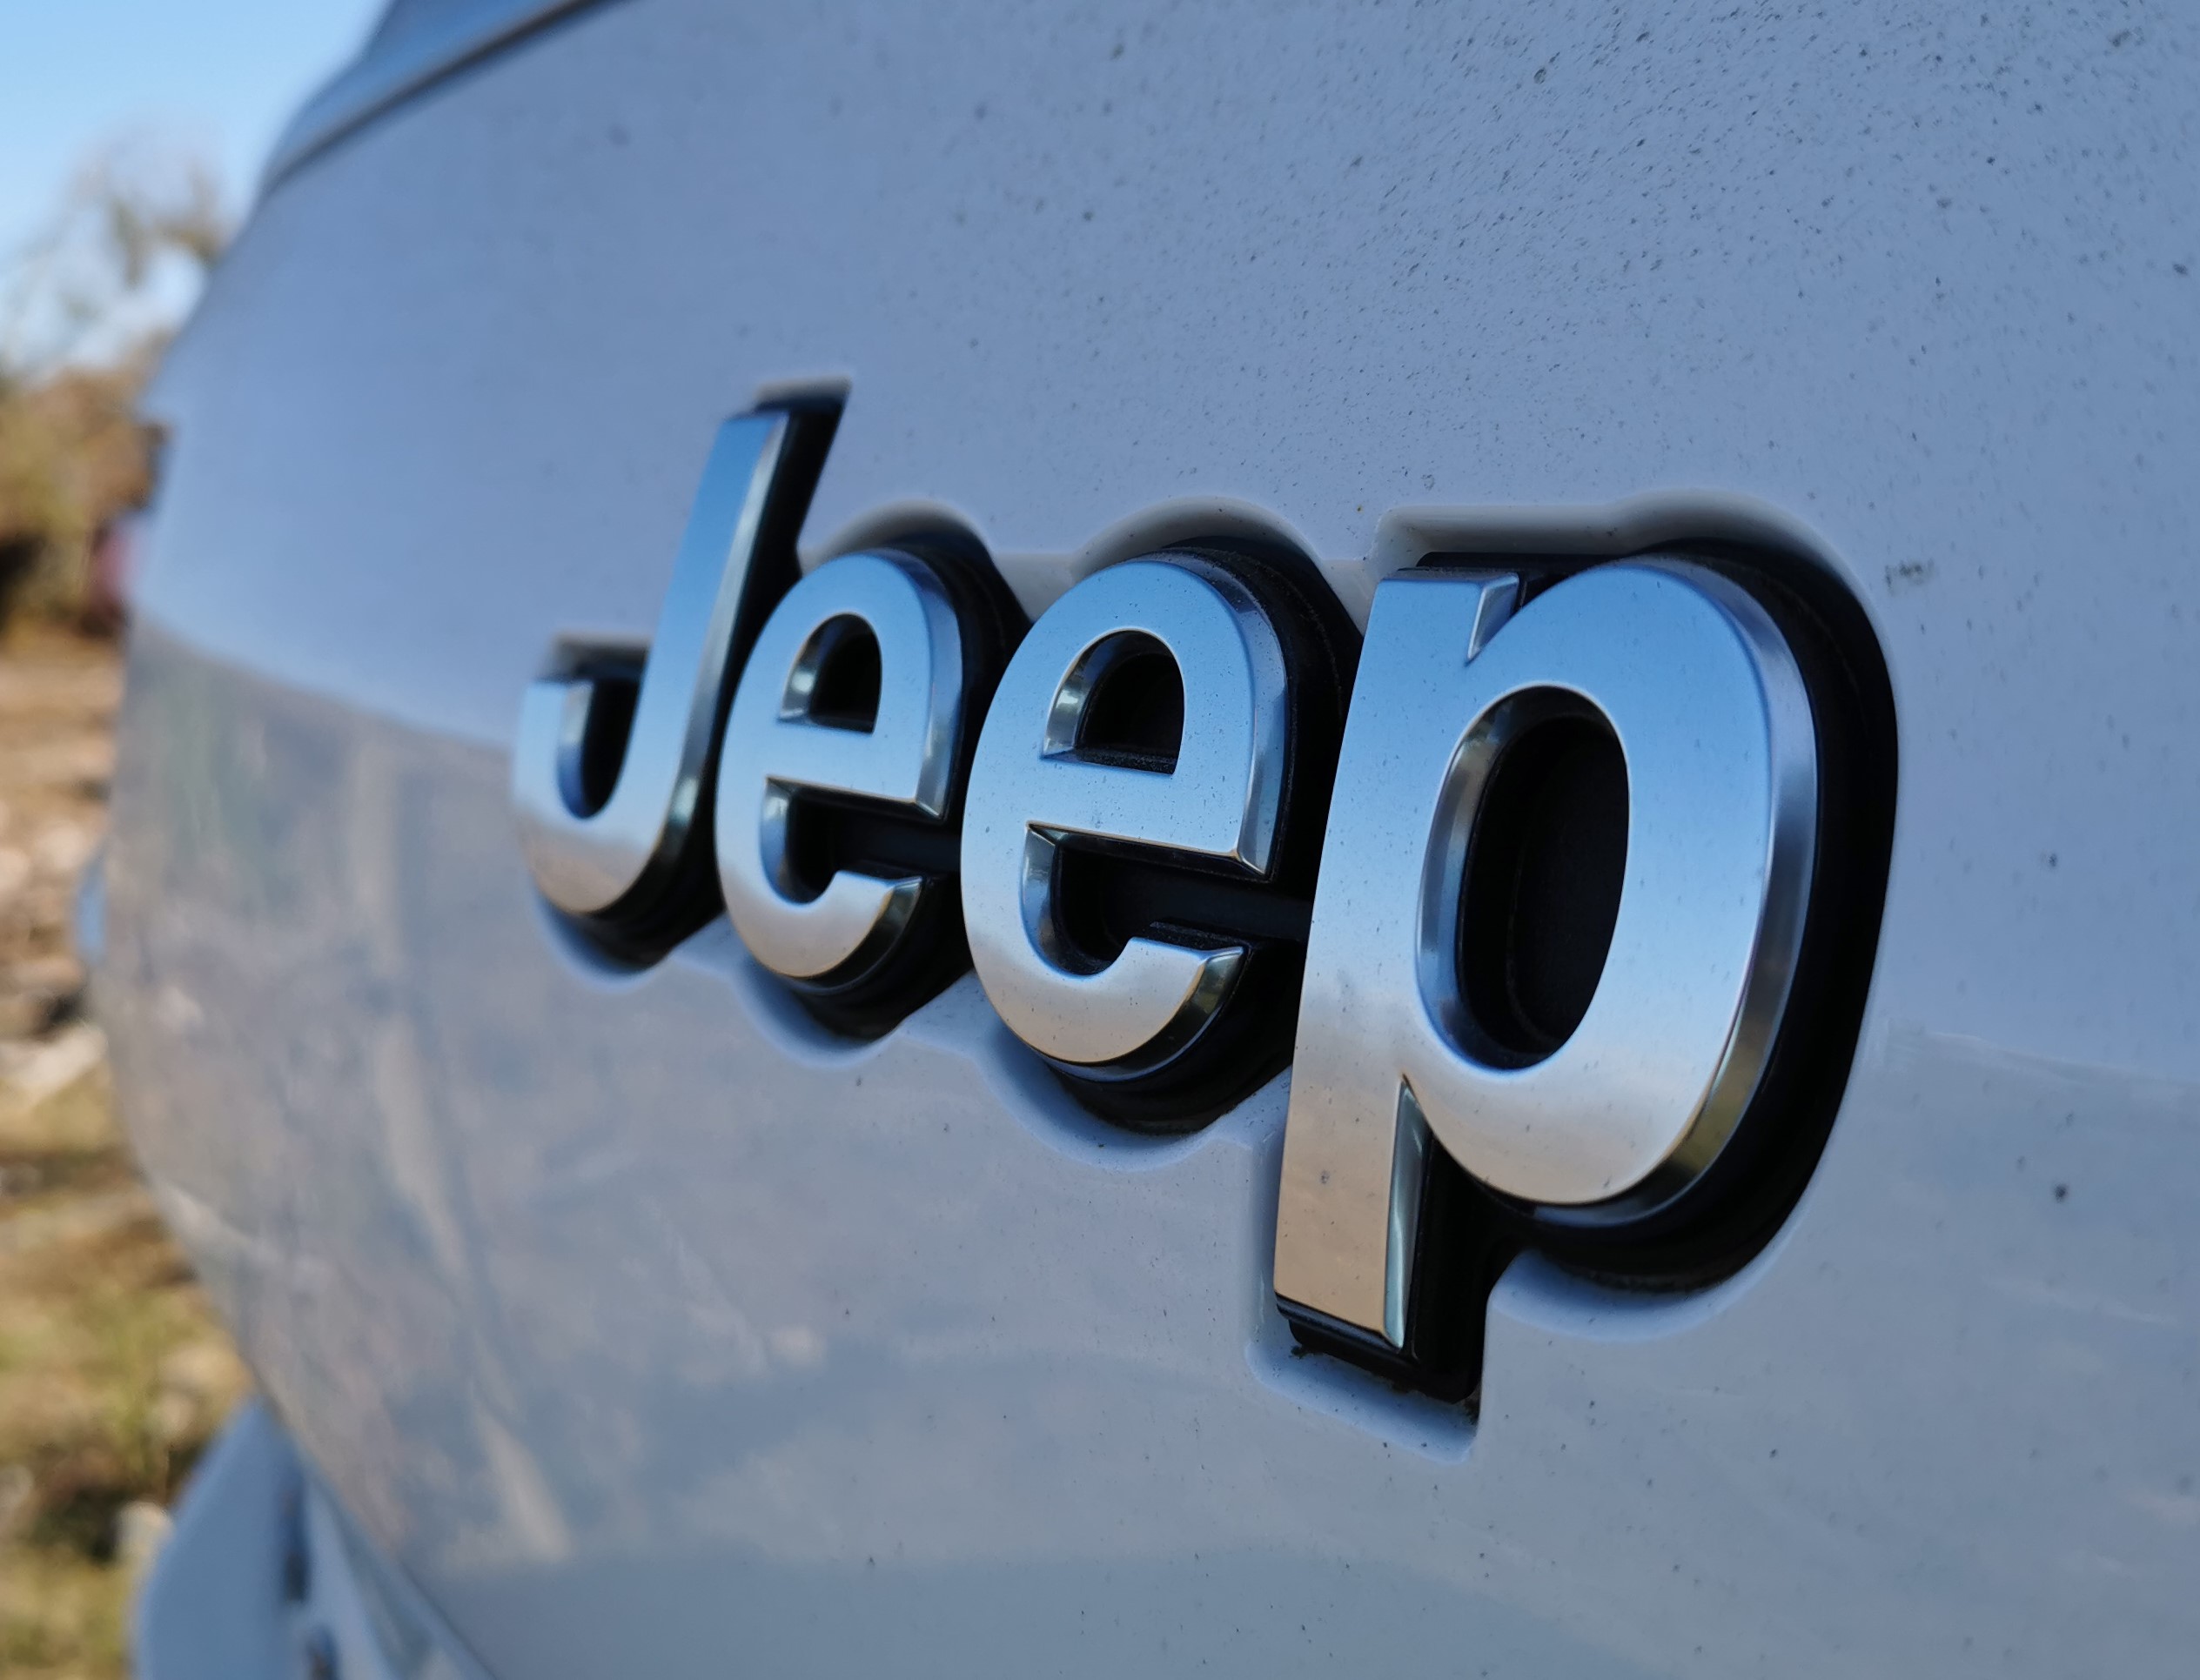 Jeep Grand Cherokee L review NZ